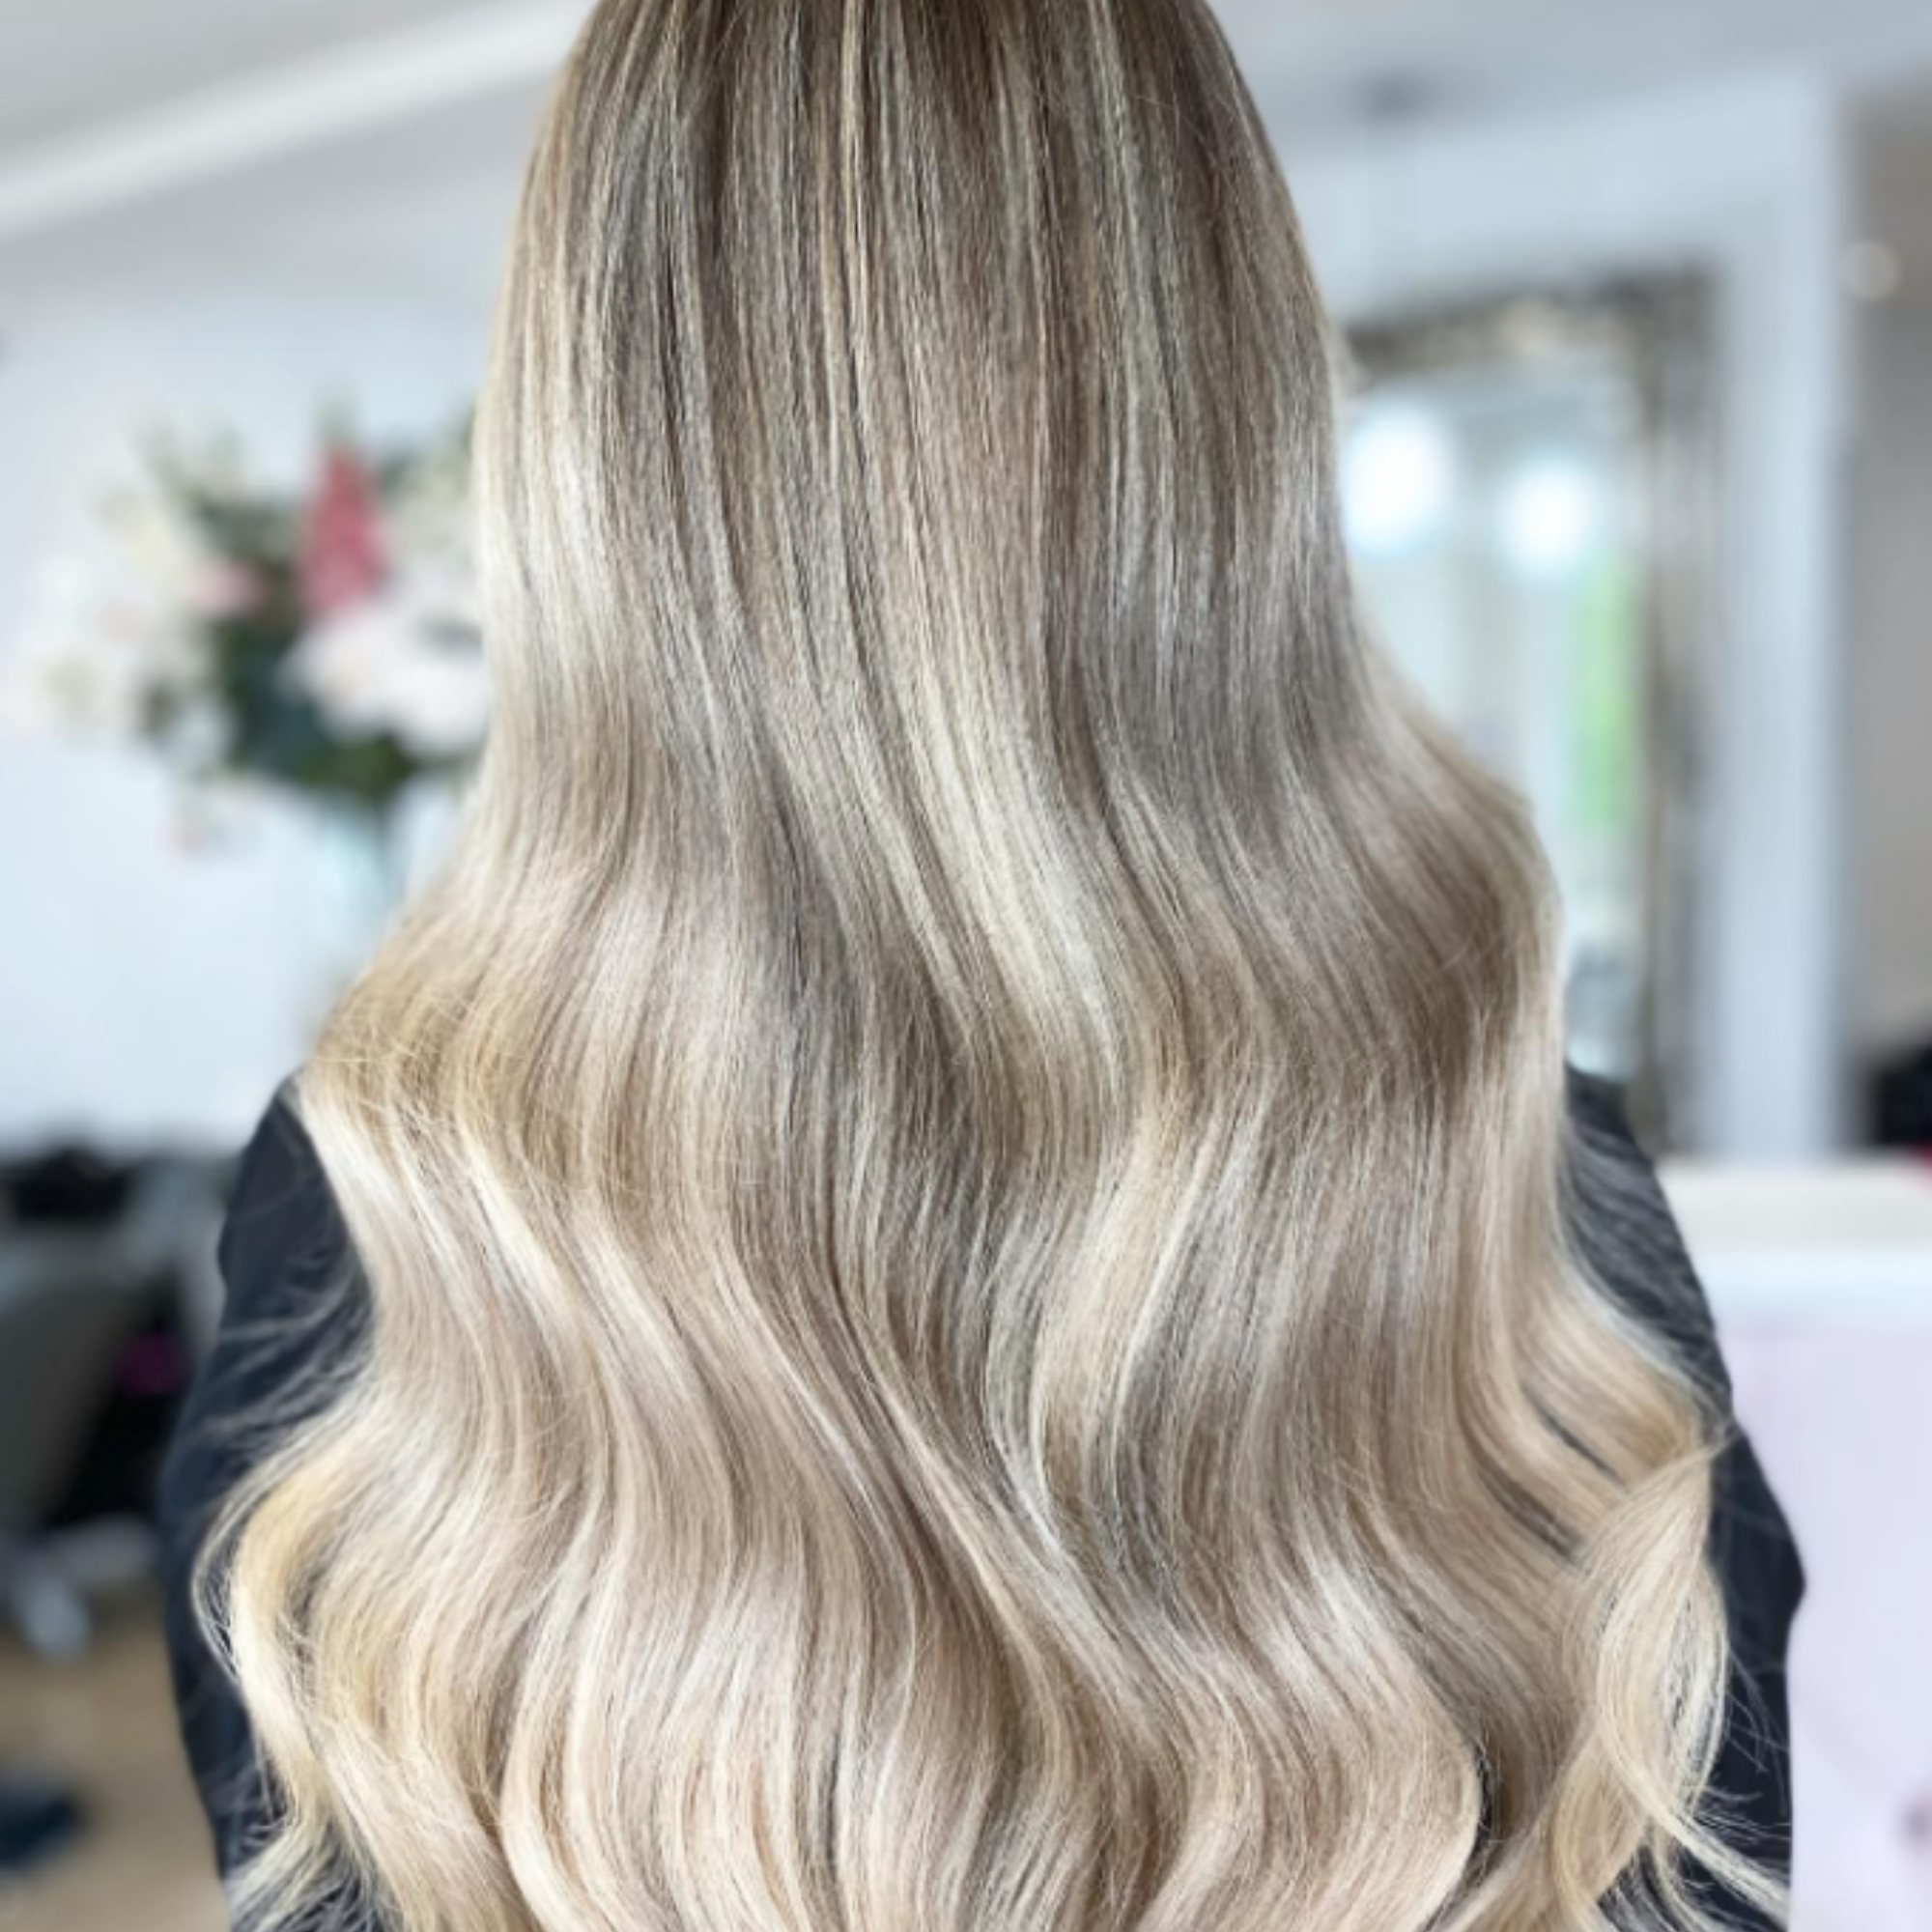 "hair rehab london 22" weft hair extensions shade swatch titled steel blonde"